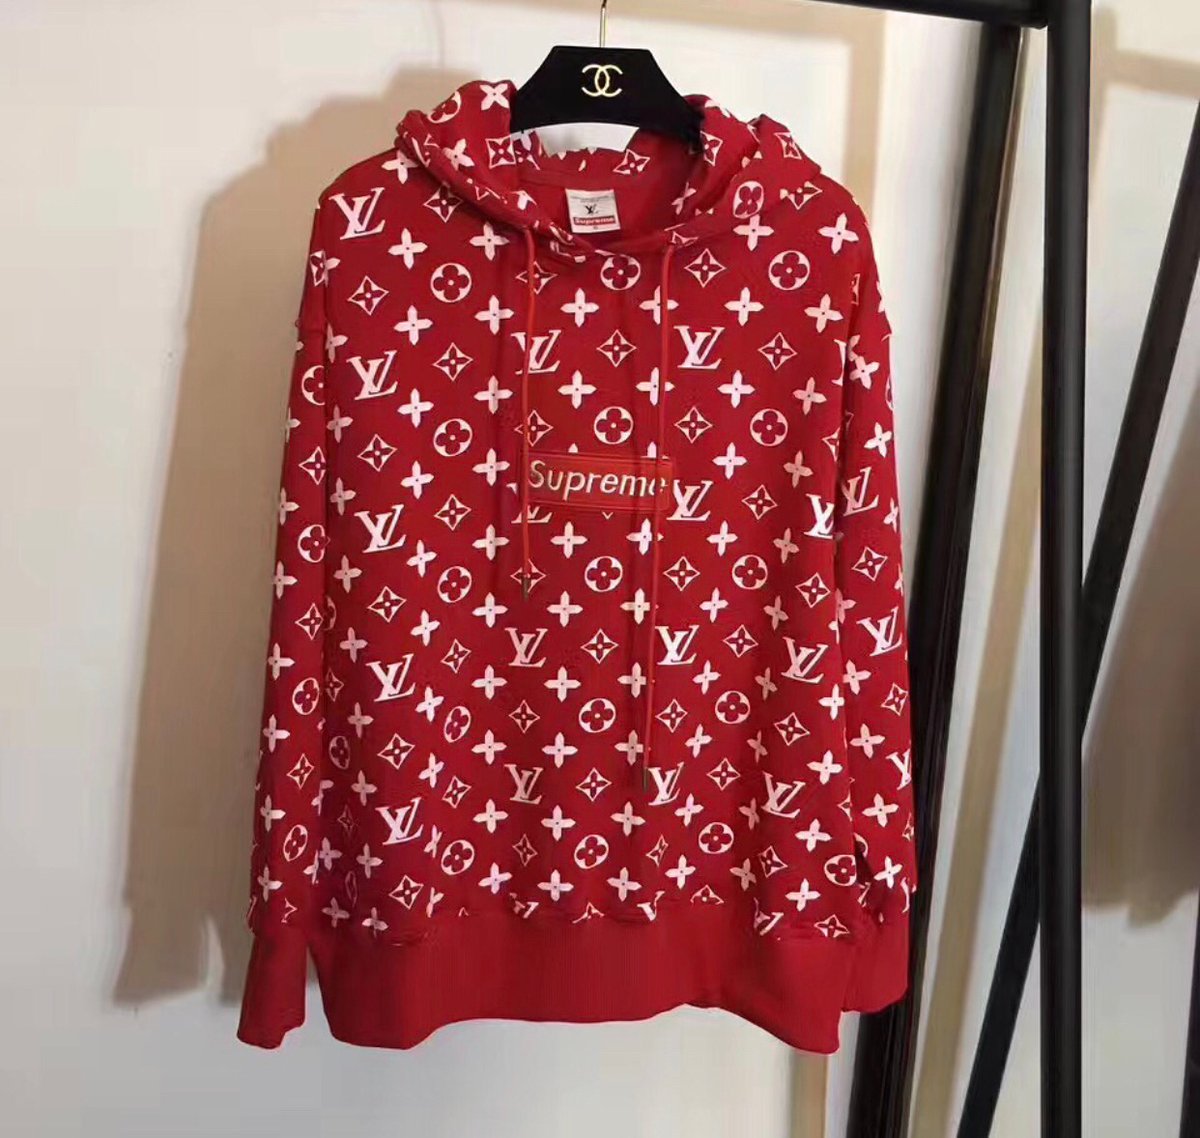 Pin by AE on Fashion : Clothing  Supreme sweater, Louis vuitton supreme,  Hooded sweatshirts